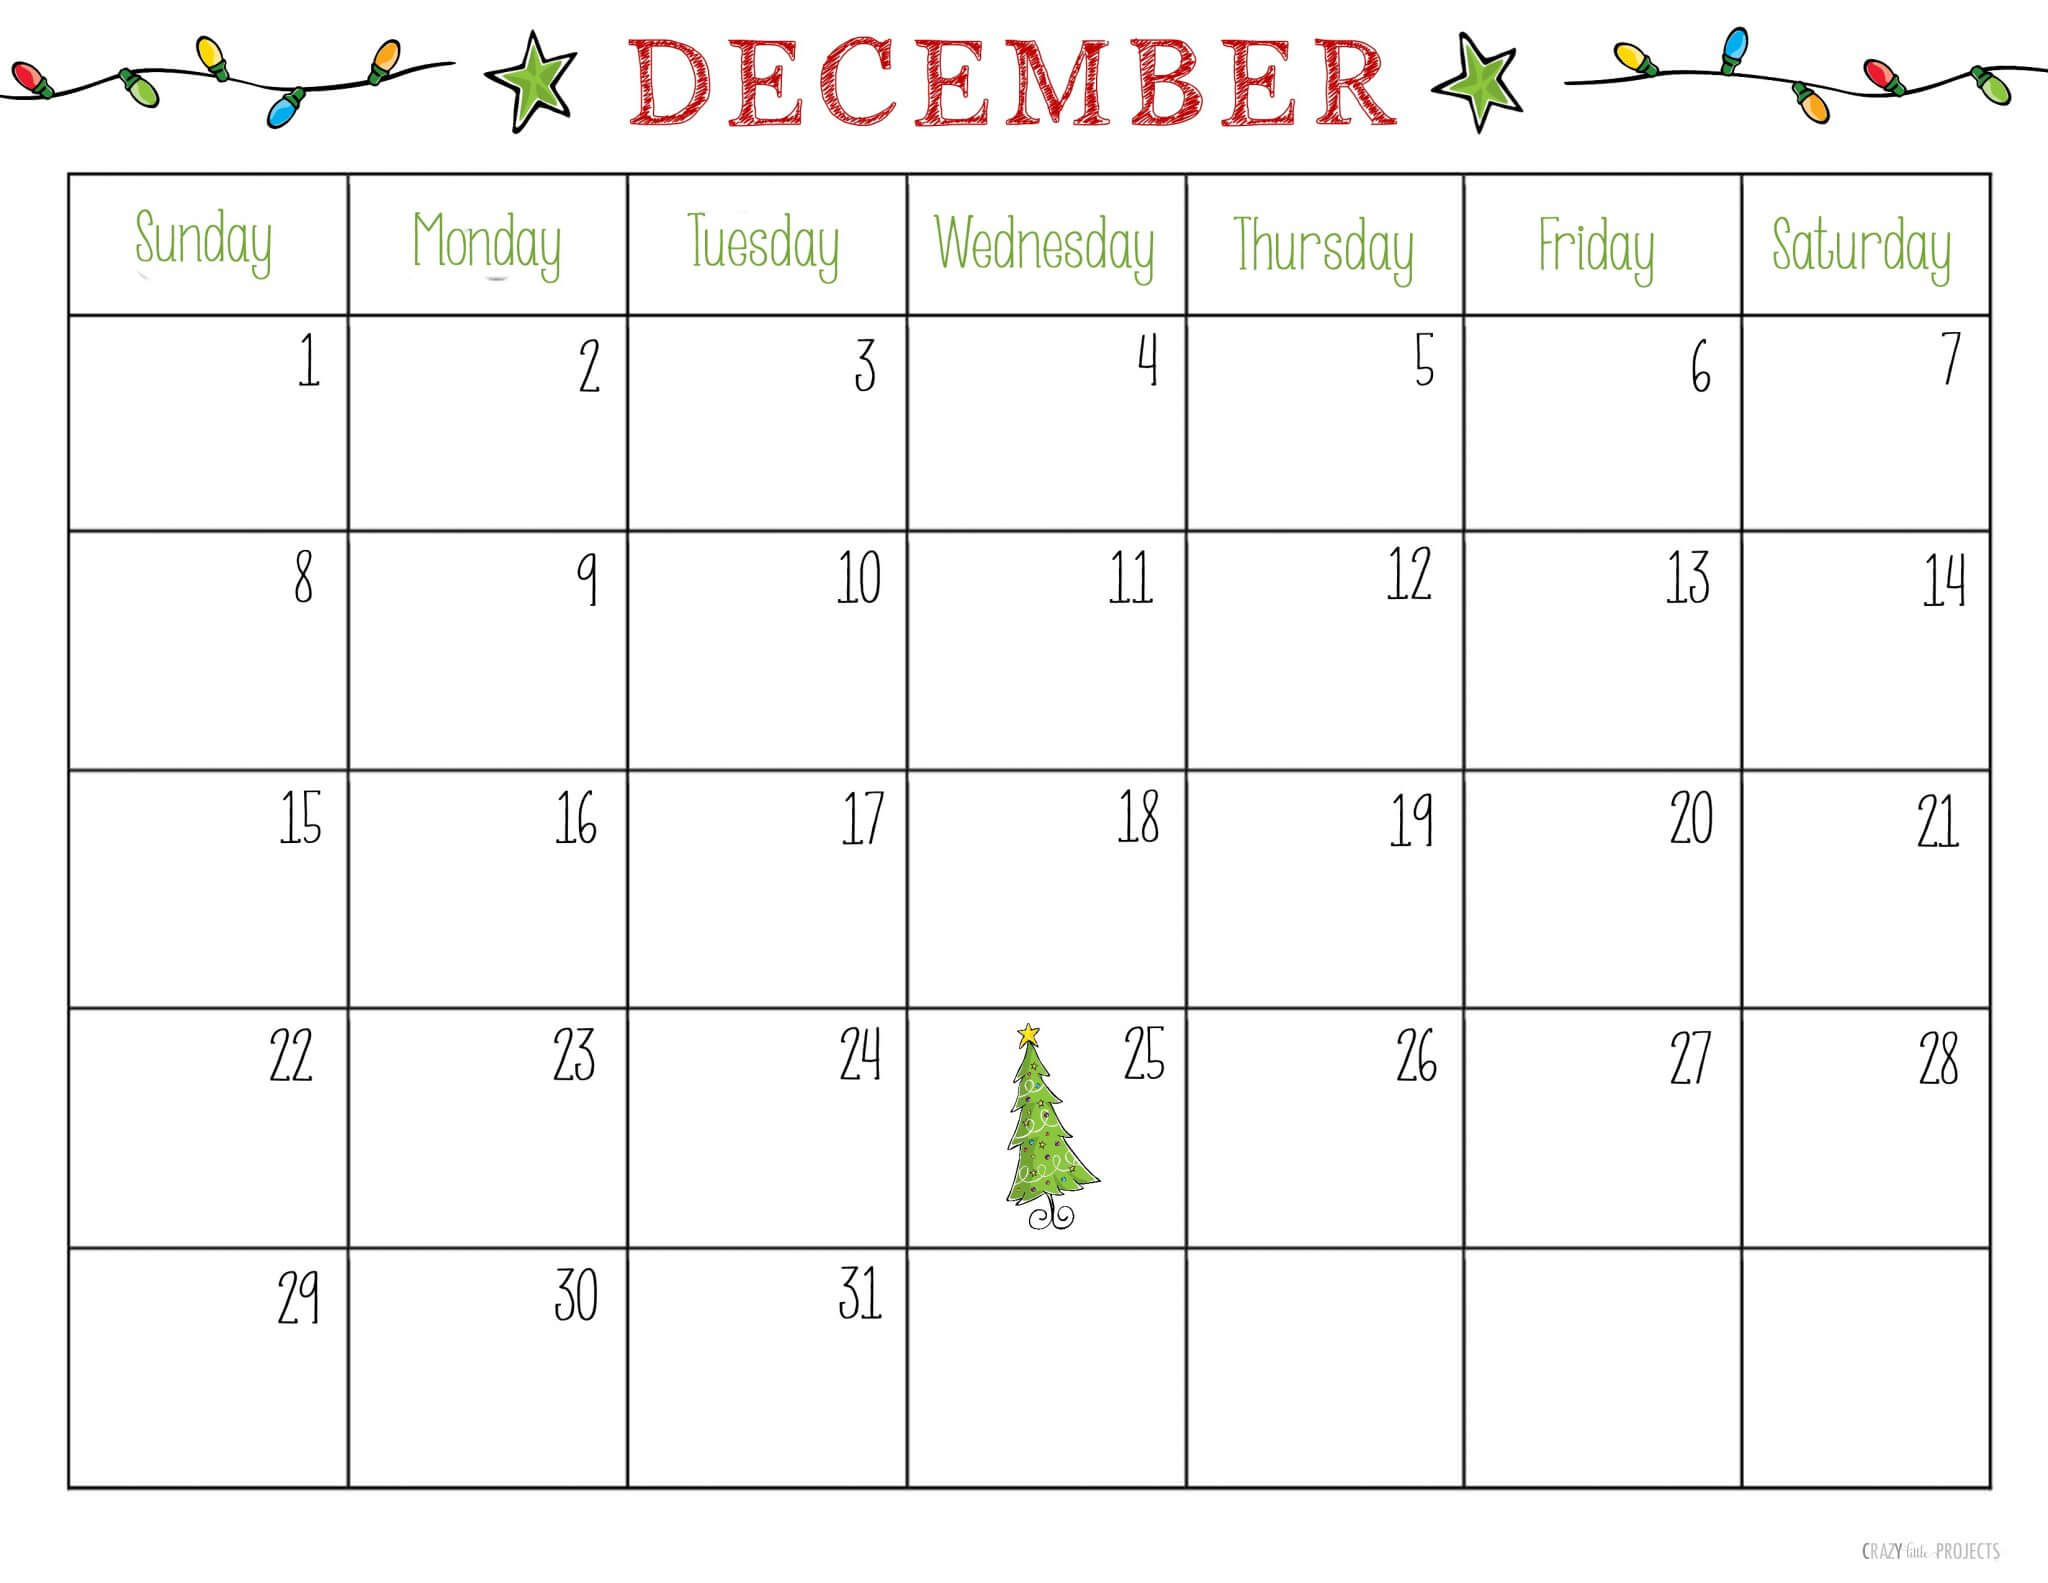 December 2018 Calendar Page For Kids – Free Printable With Blank Calendar Template For Kids